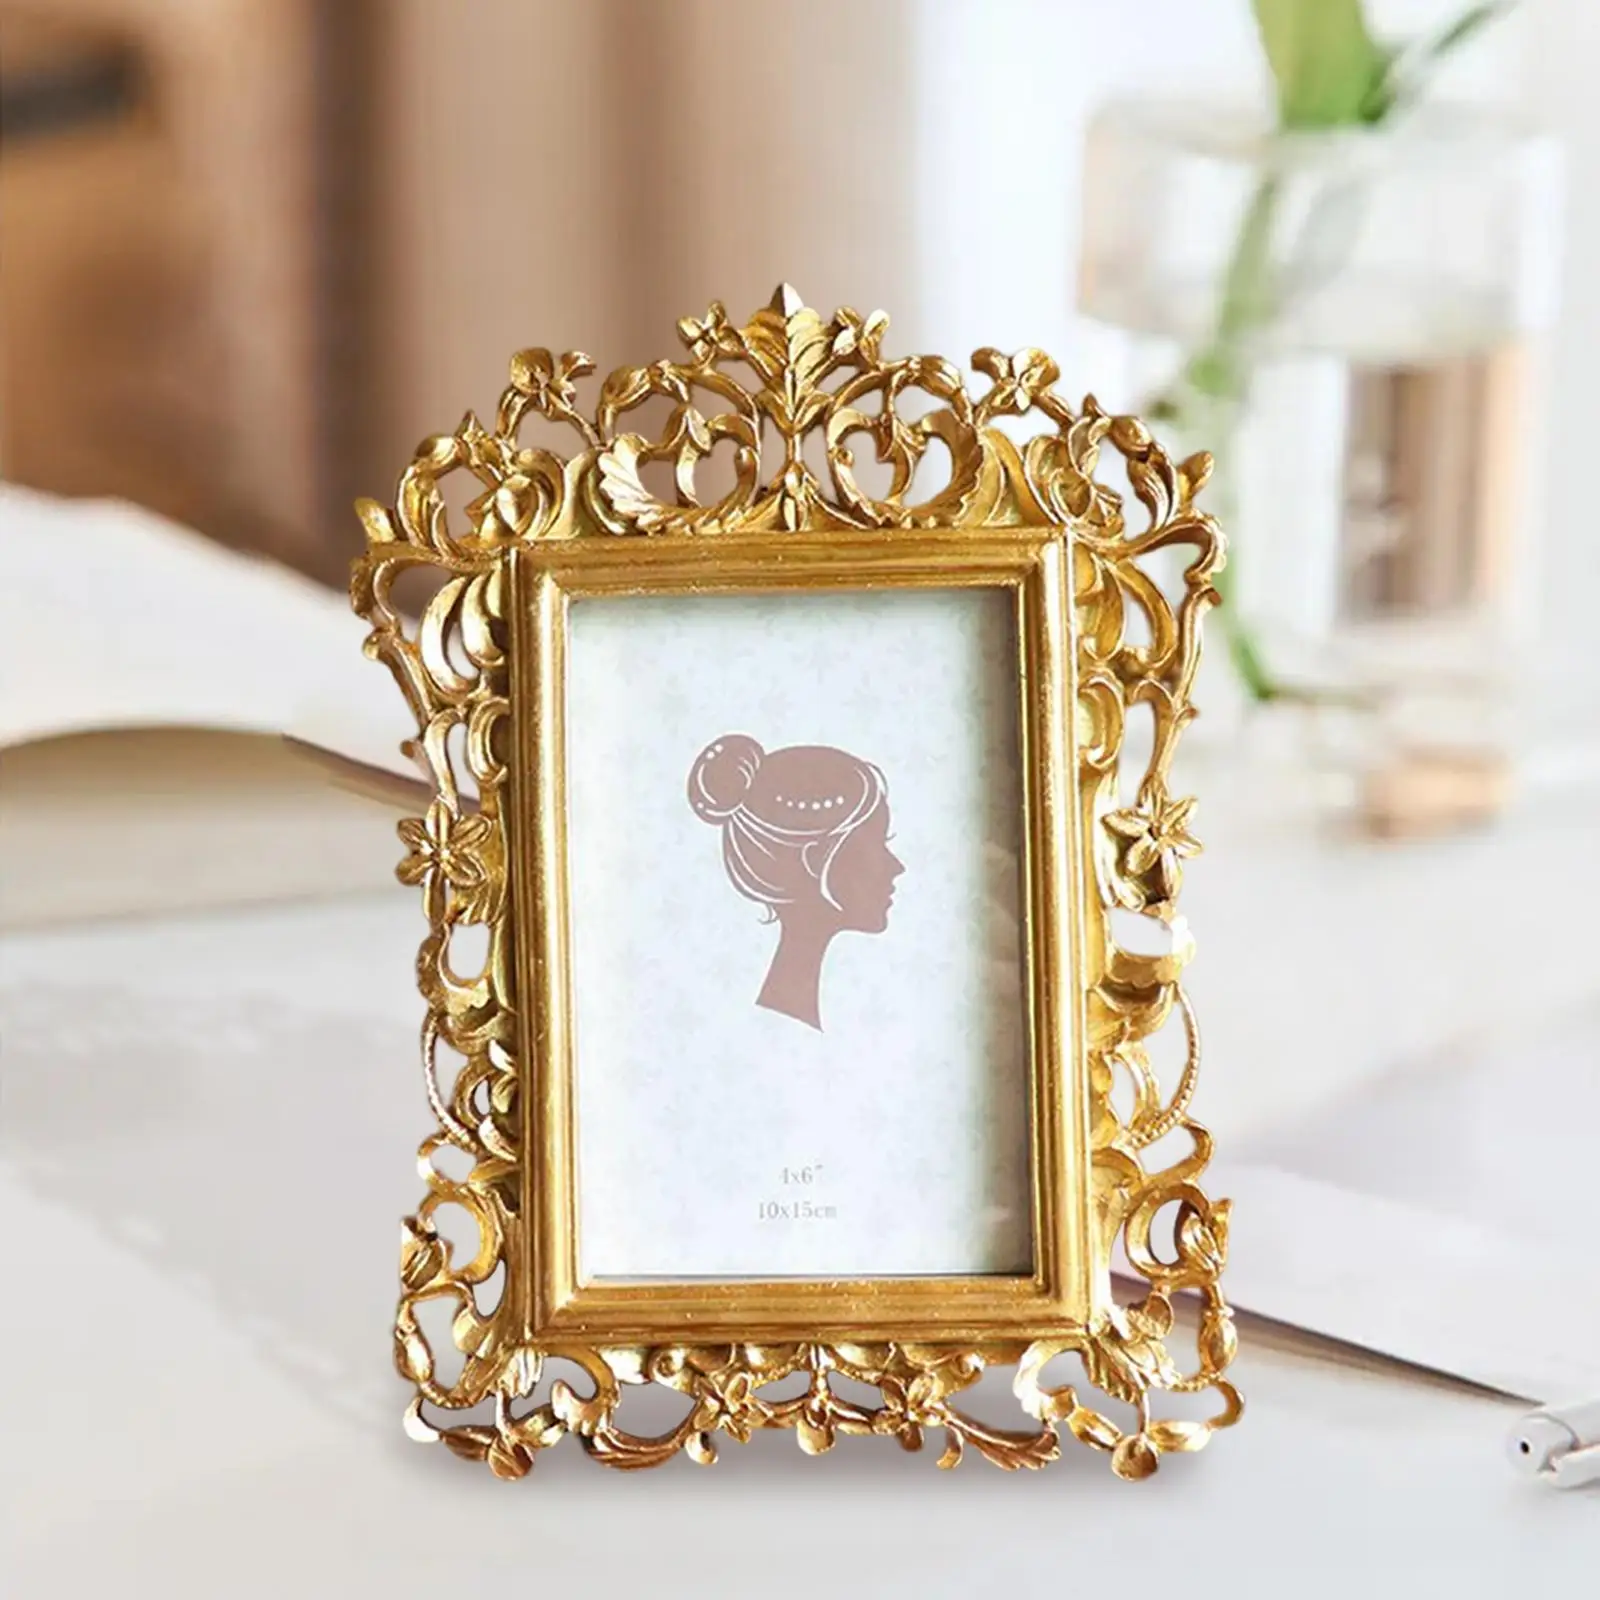 European Style Antique Gold Resin Photo Frame Wall Mounting for 4x6inch Picture, Attractive Look Luxury Decoration Elegant